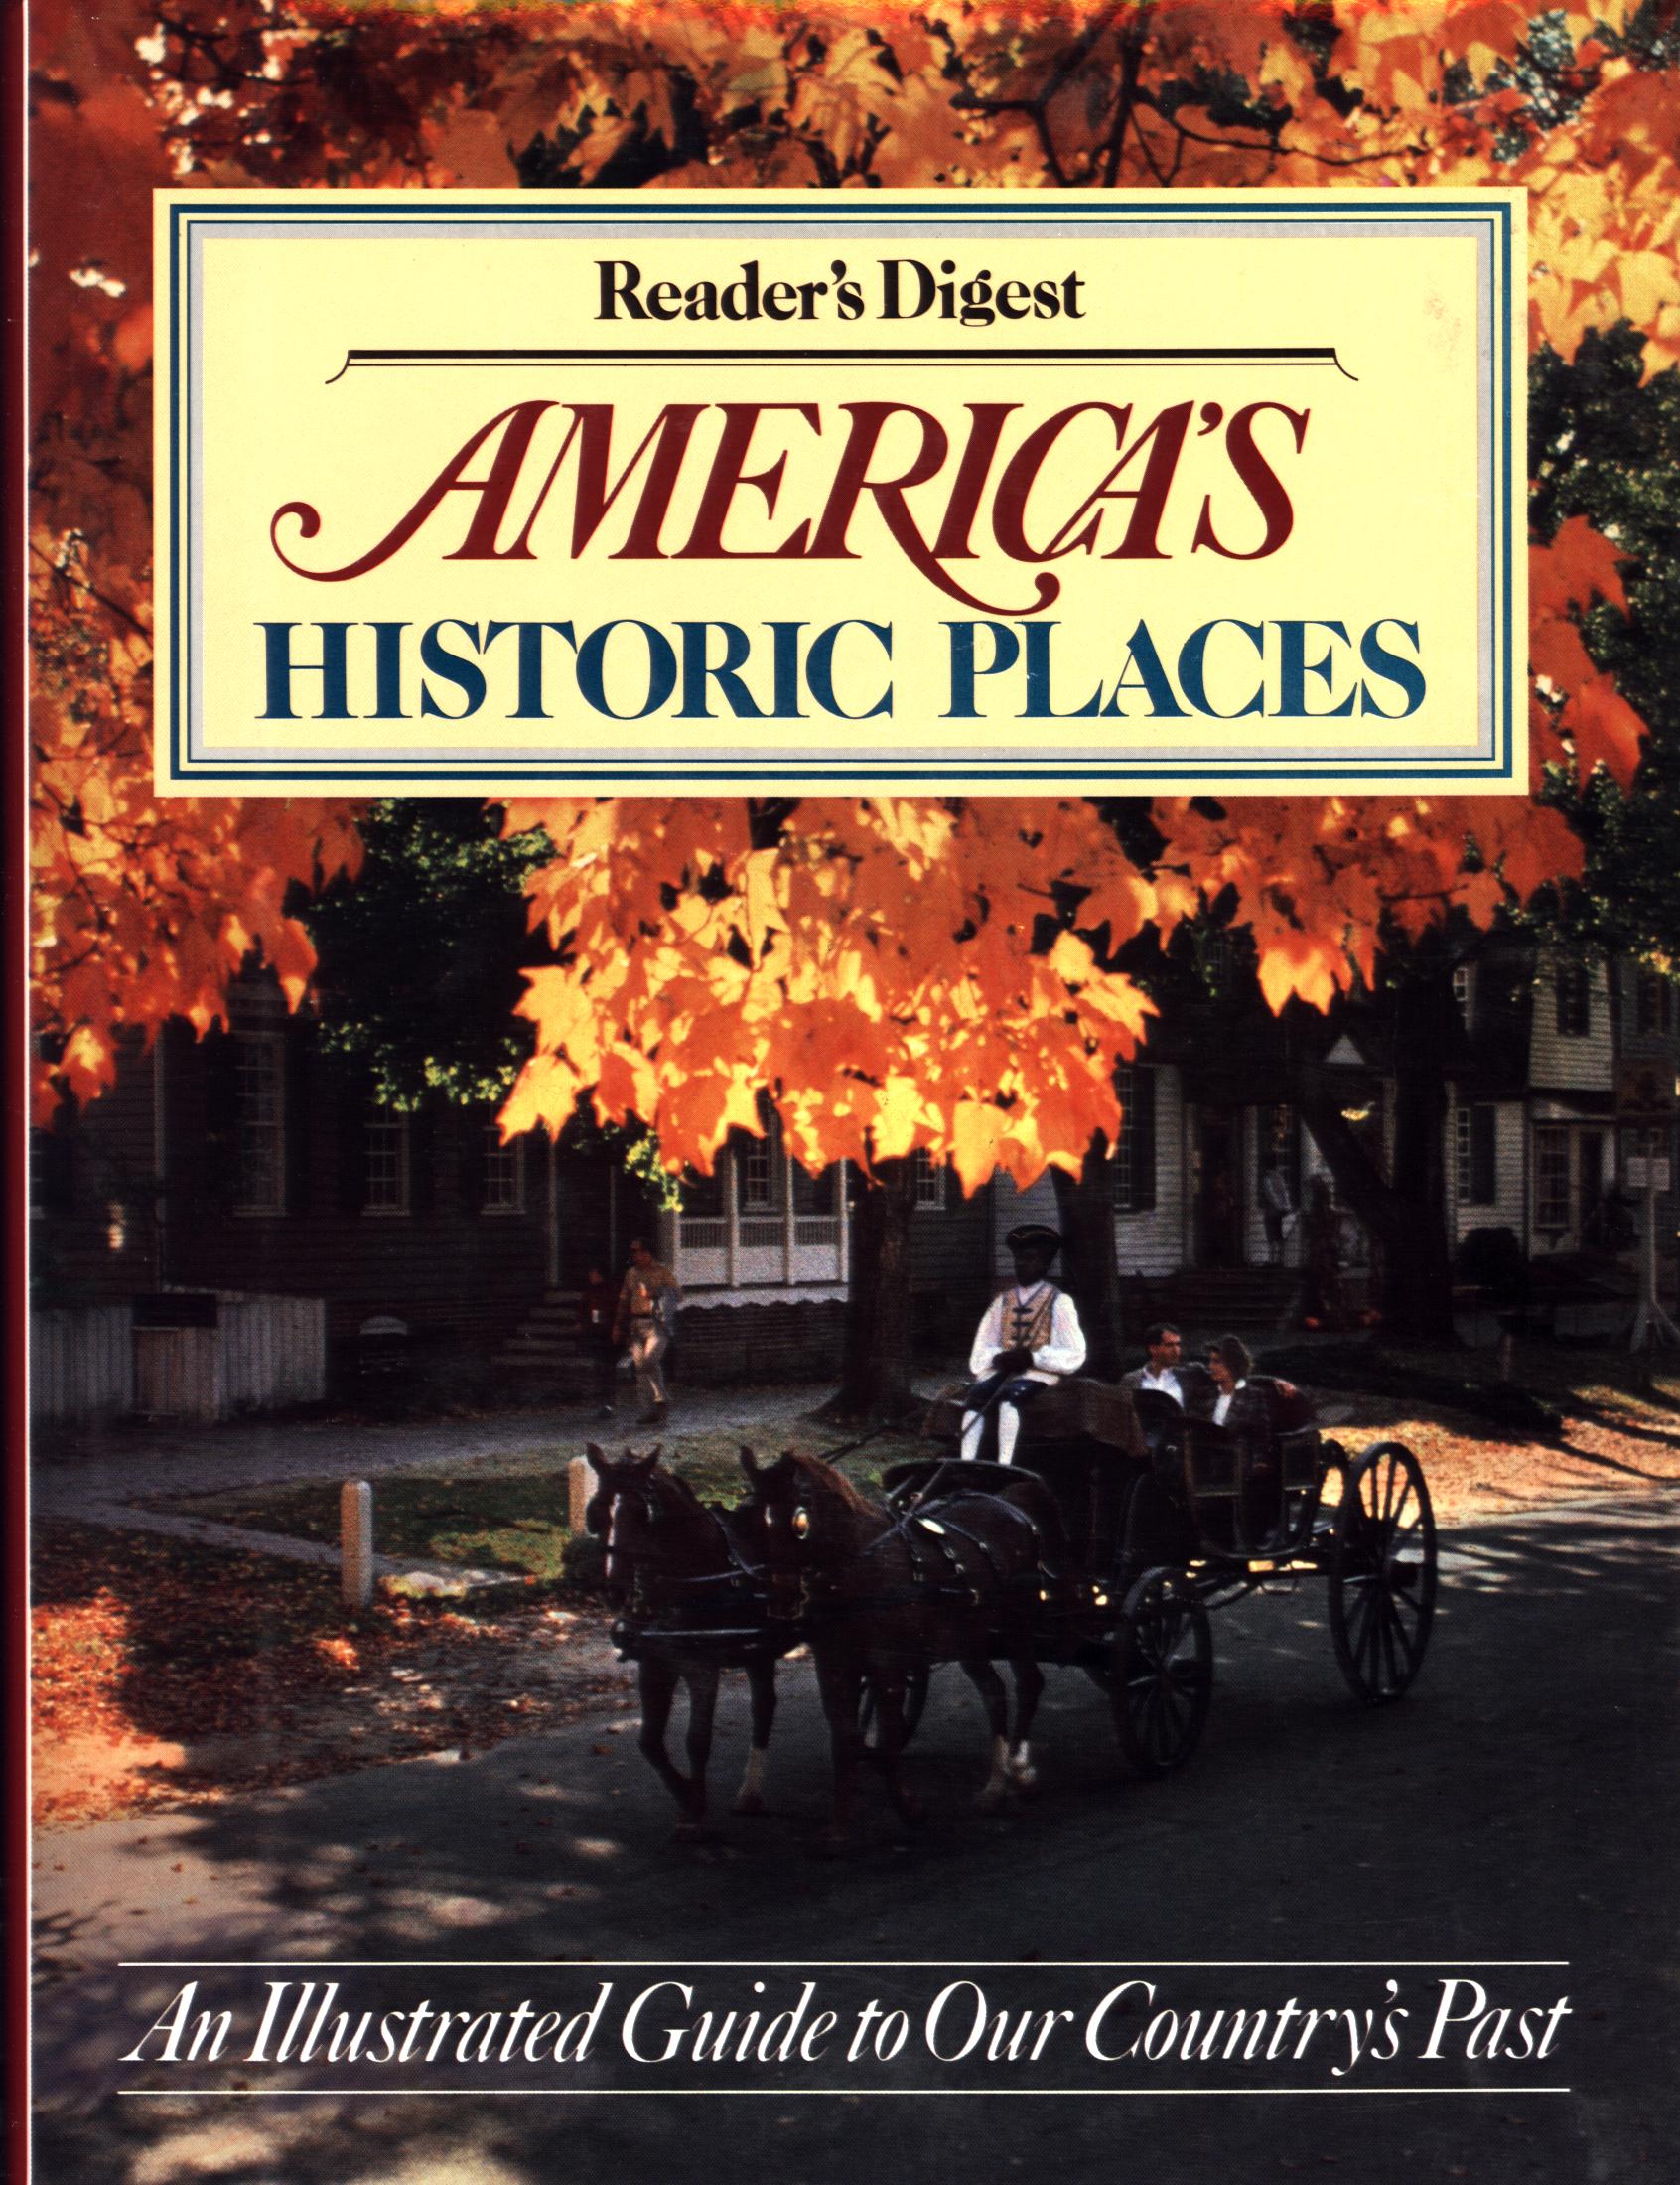 AMERICA'S HISTORIC PLACES: an illustrated guide to our country's past.